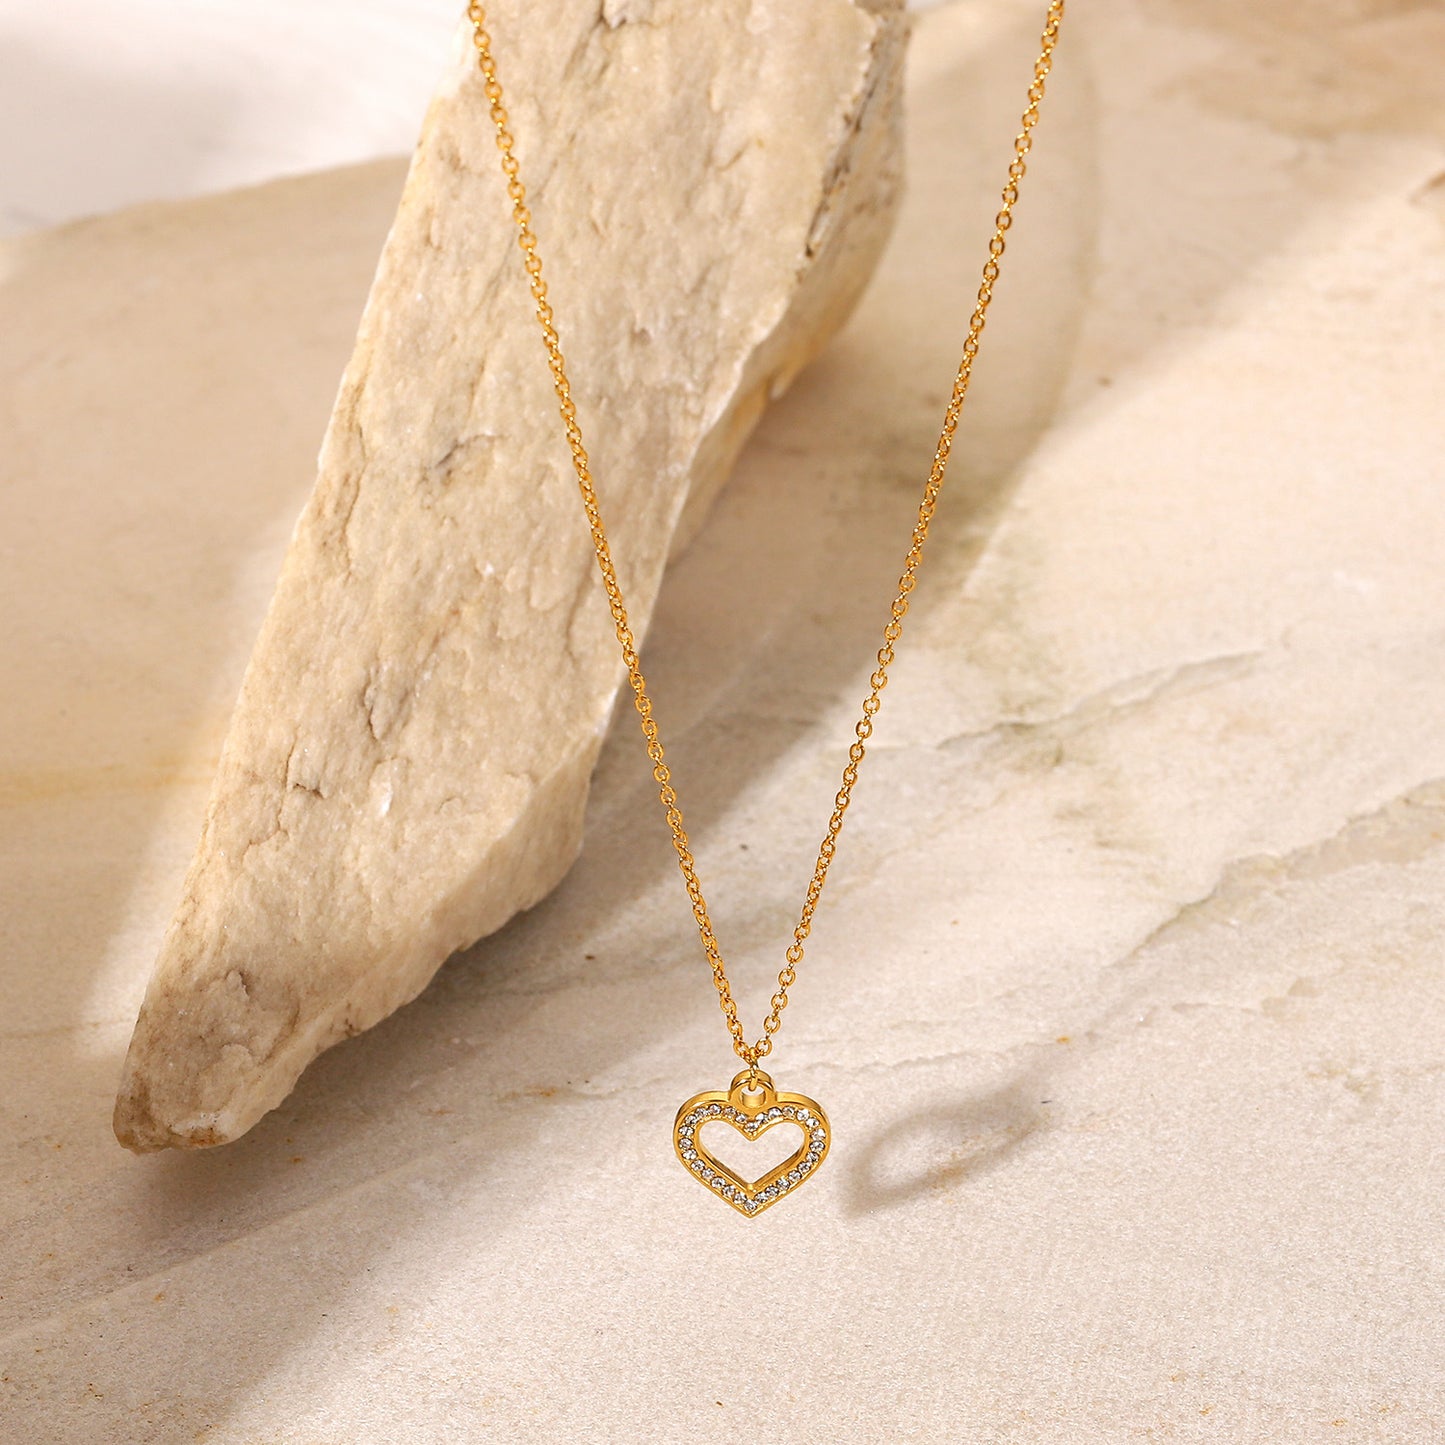 Gold Heart Pendant with Crystals Necklace